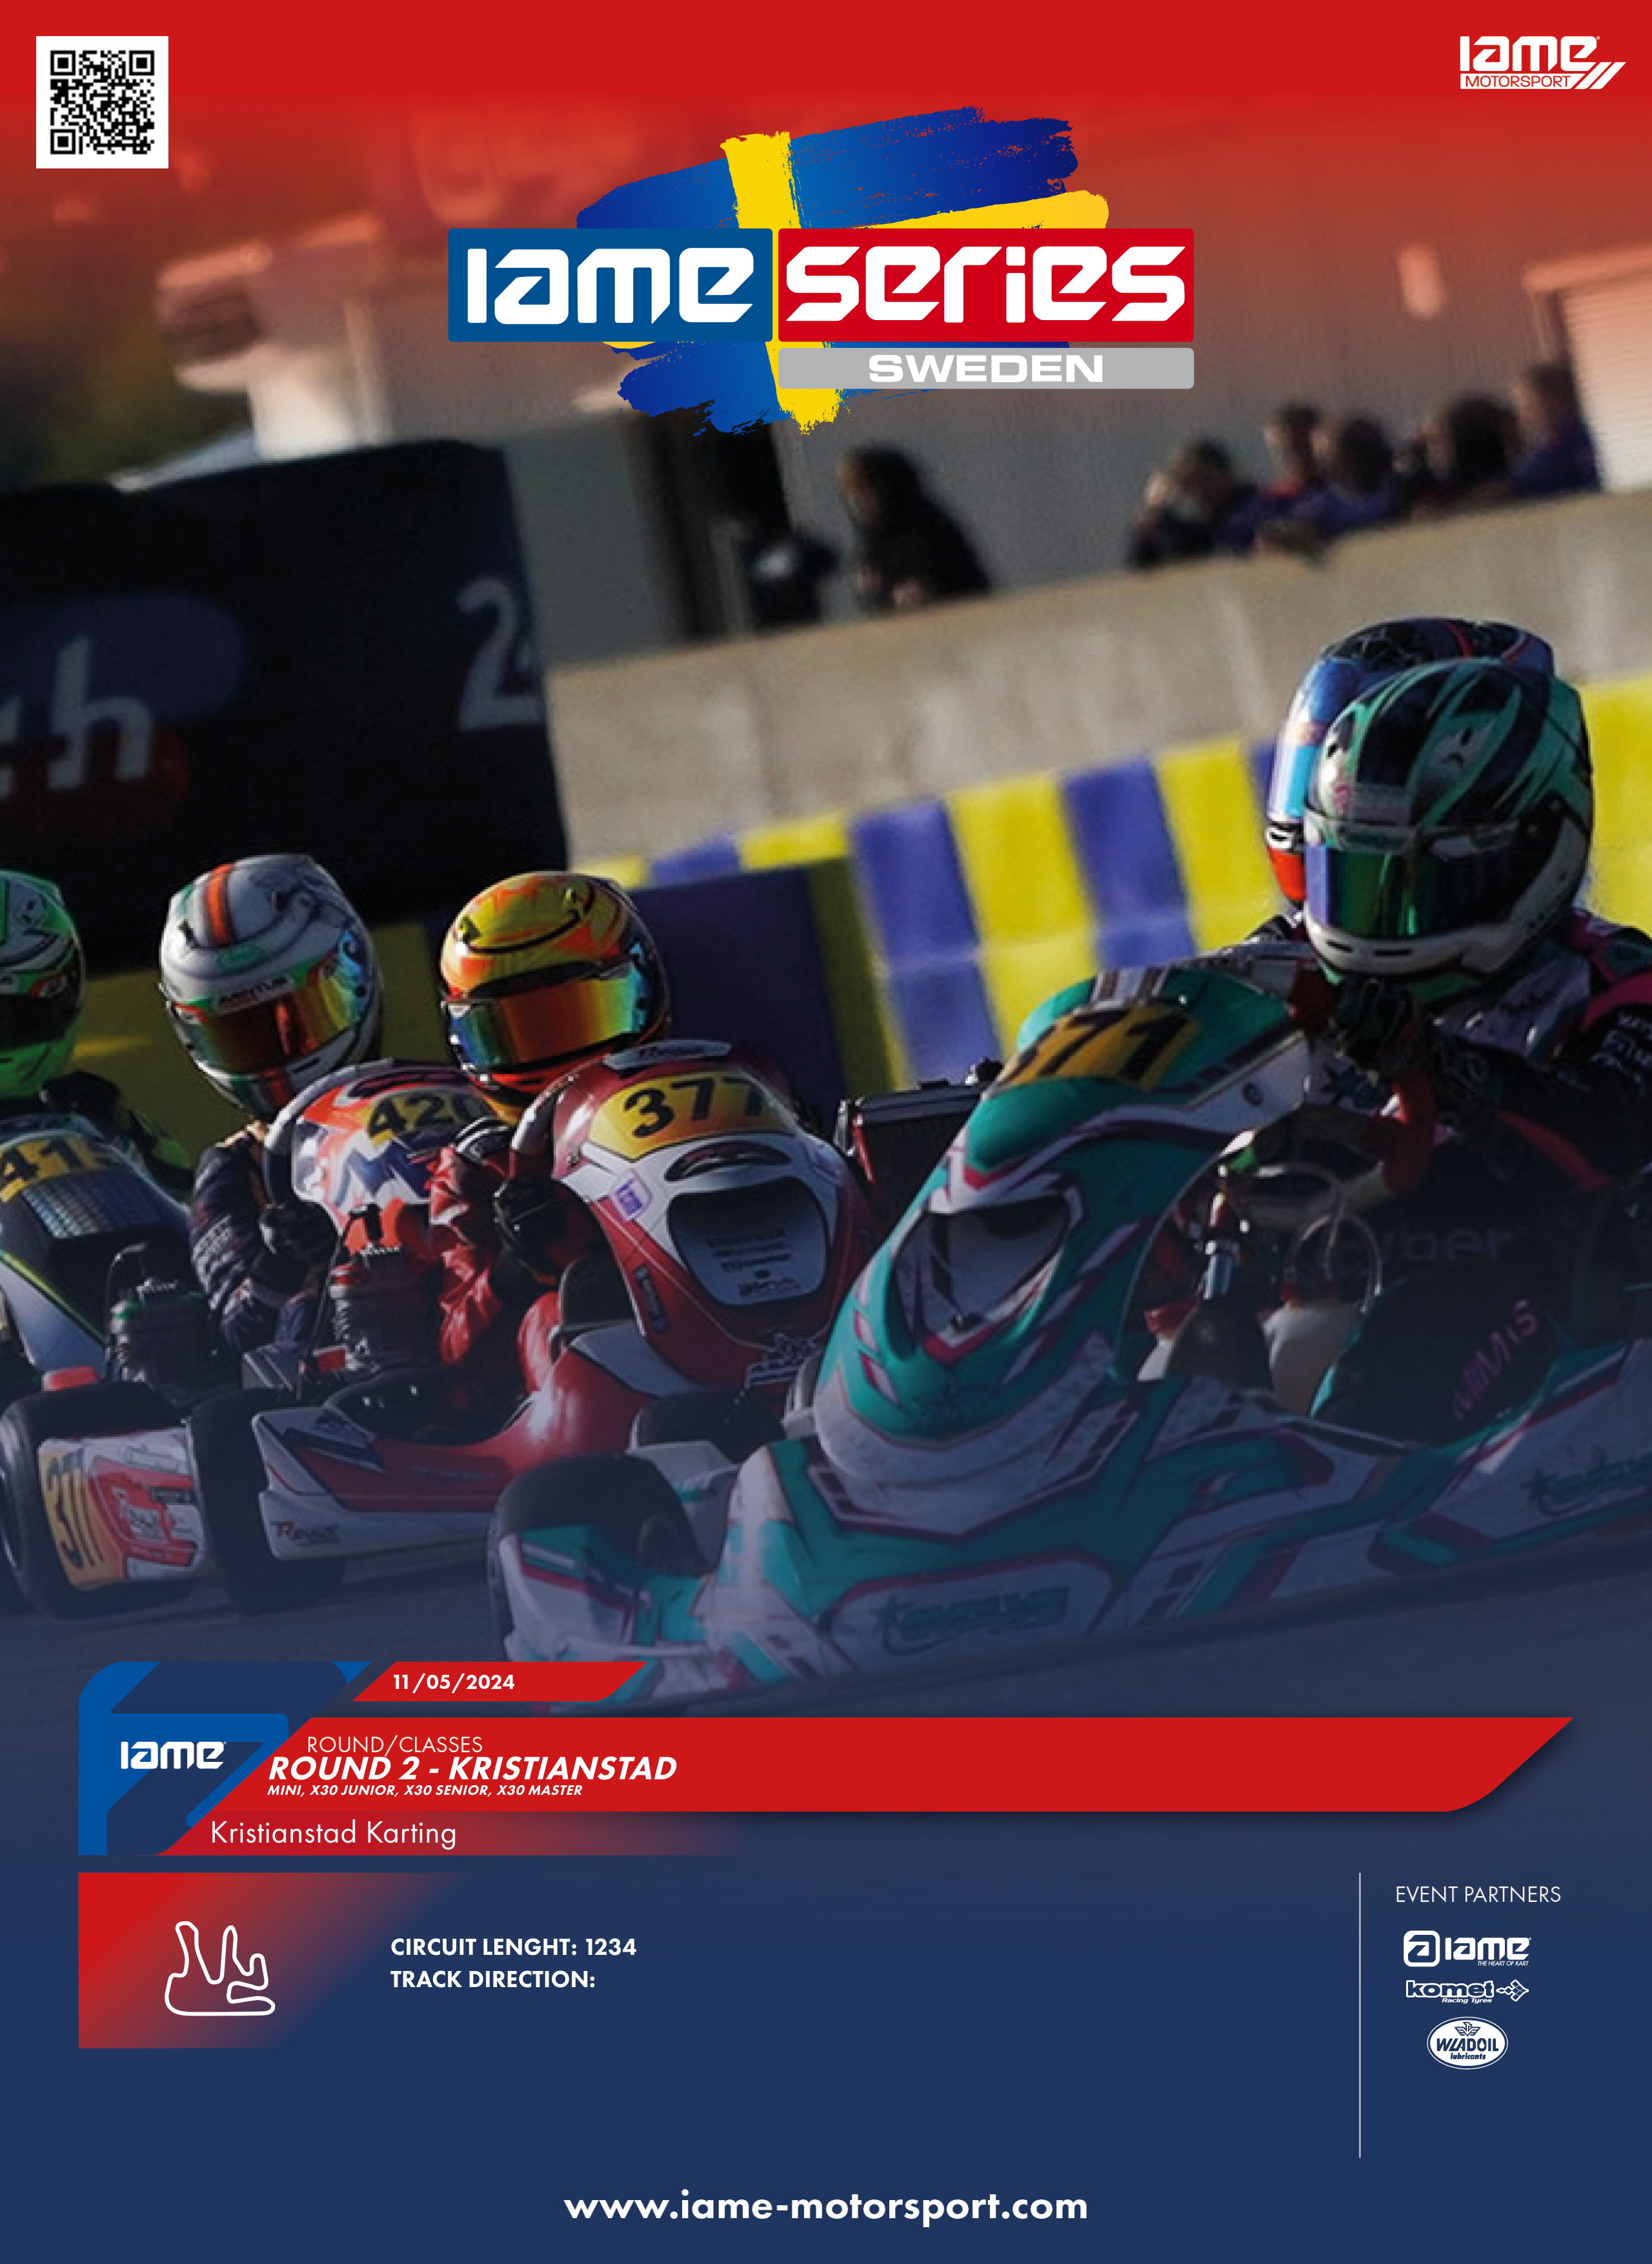 Gear Up for an Unforgettable Weekend of Karting Action: IAME Series Sweden - Round 2 in Kristianstad!